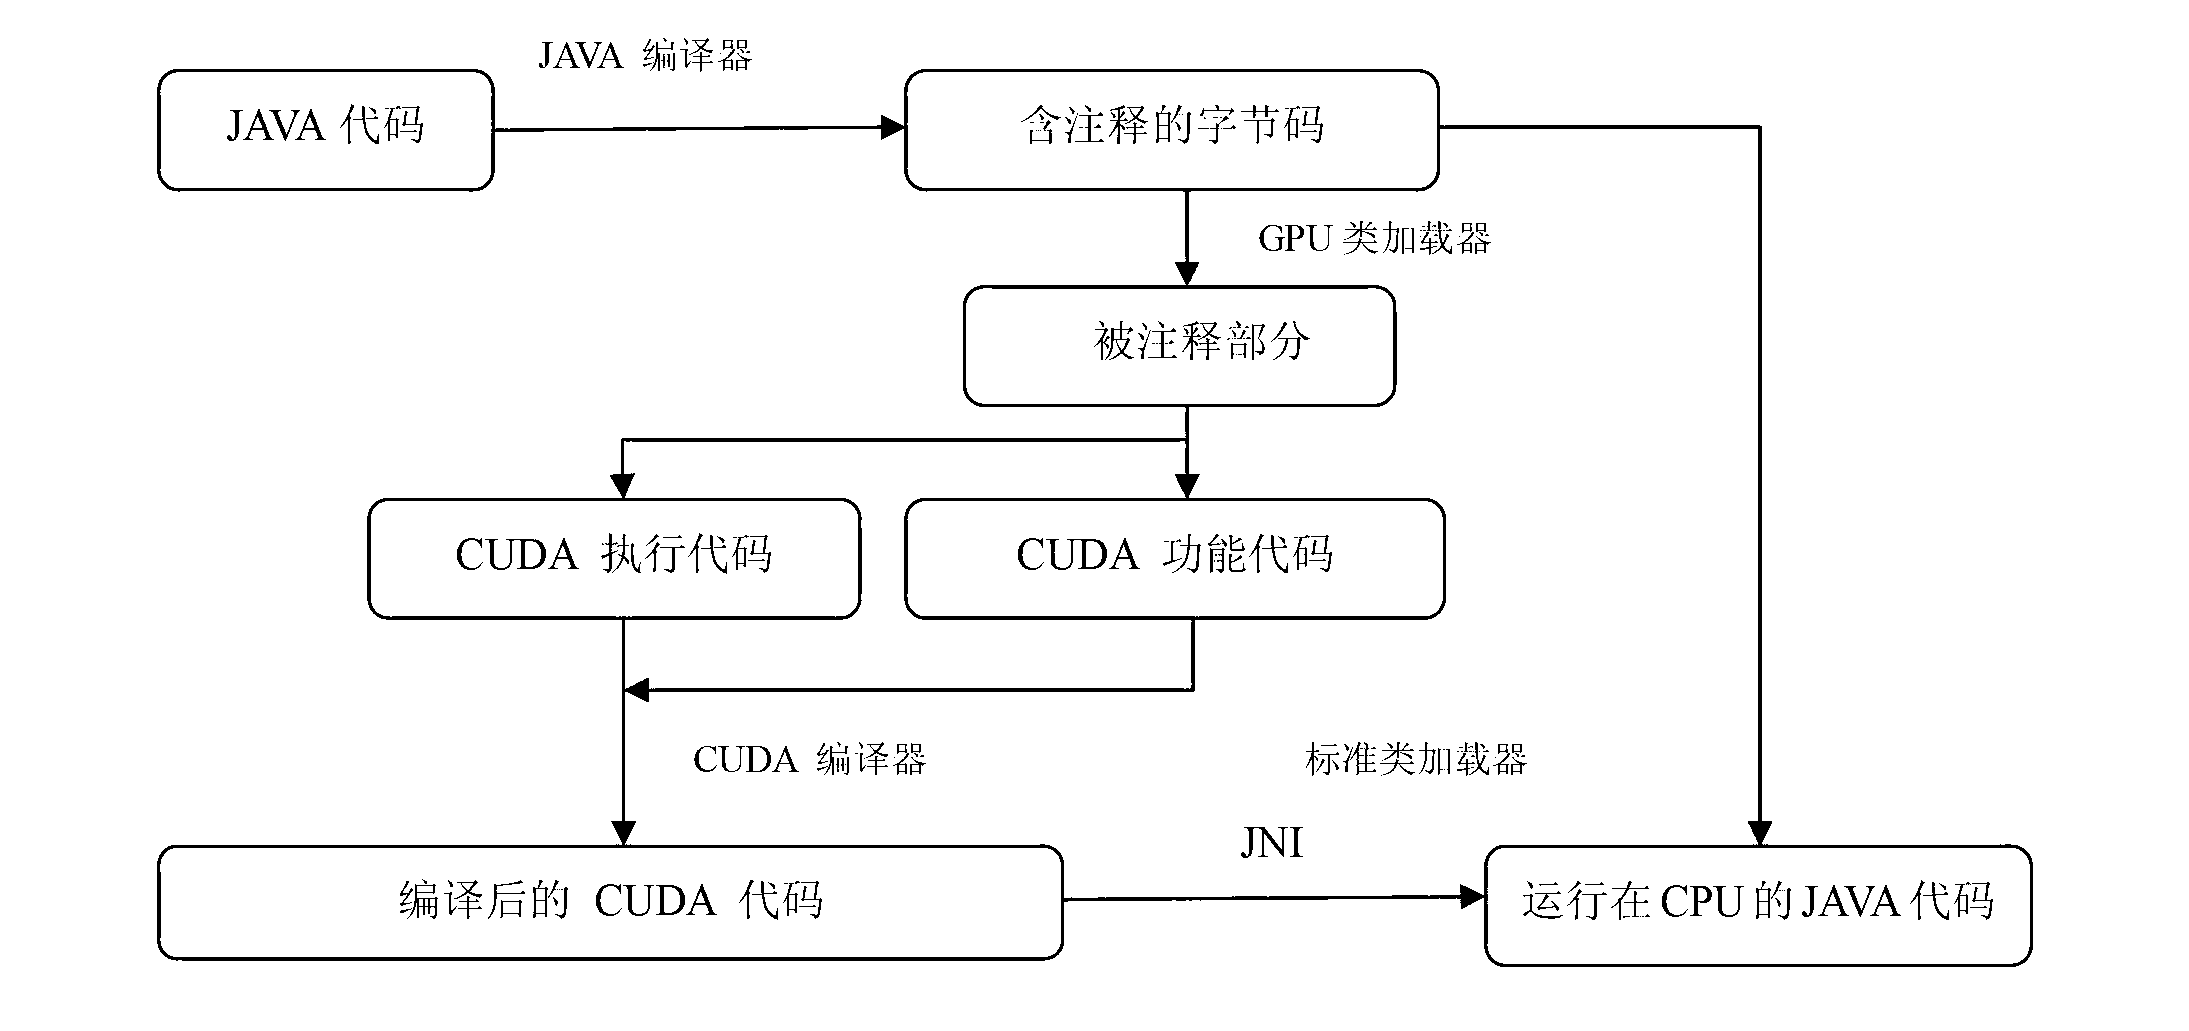 CPU/GPU (Central Processing Unit/ Graphic Processing Unit) cooperative processing method oriented to mass data high-performance computation